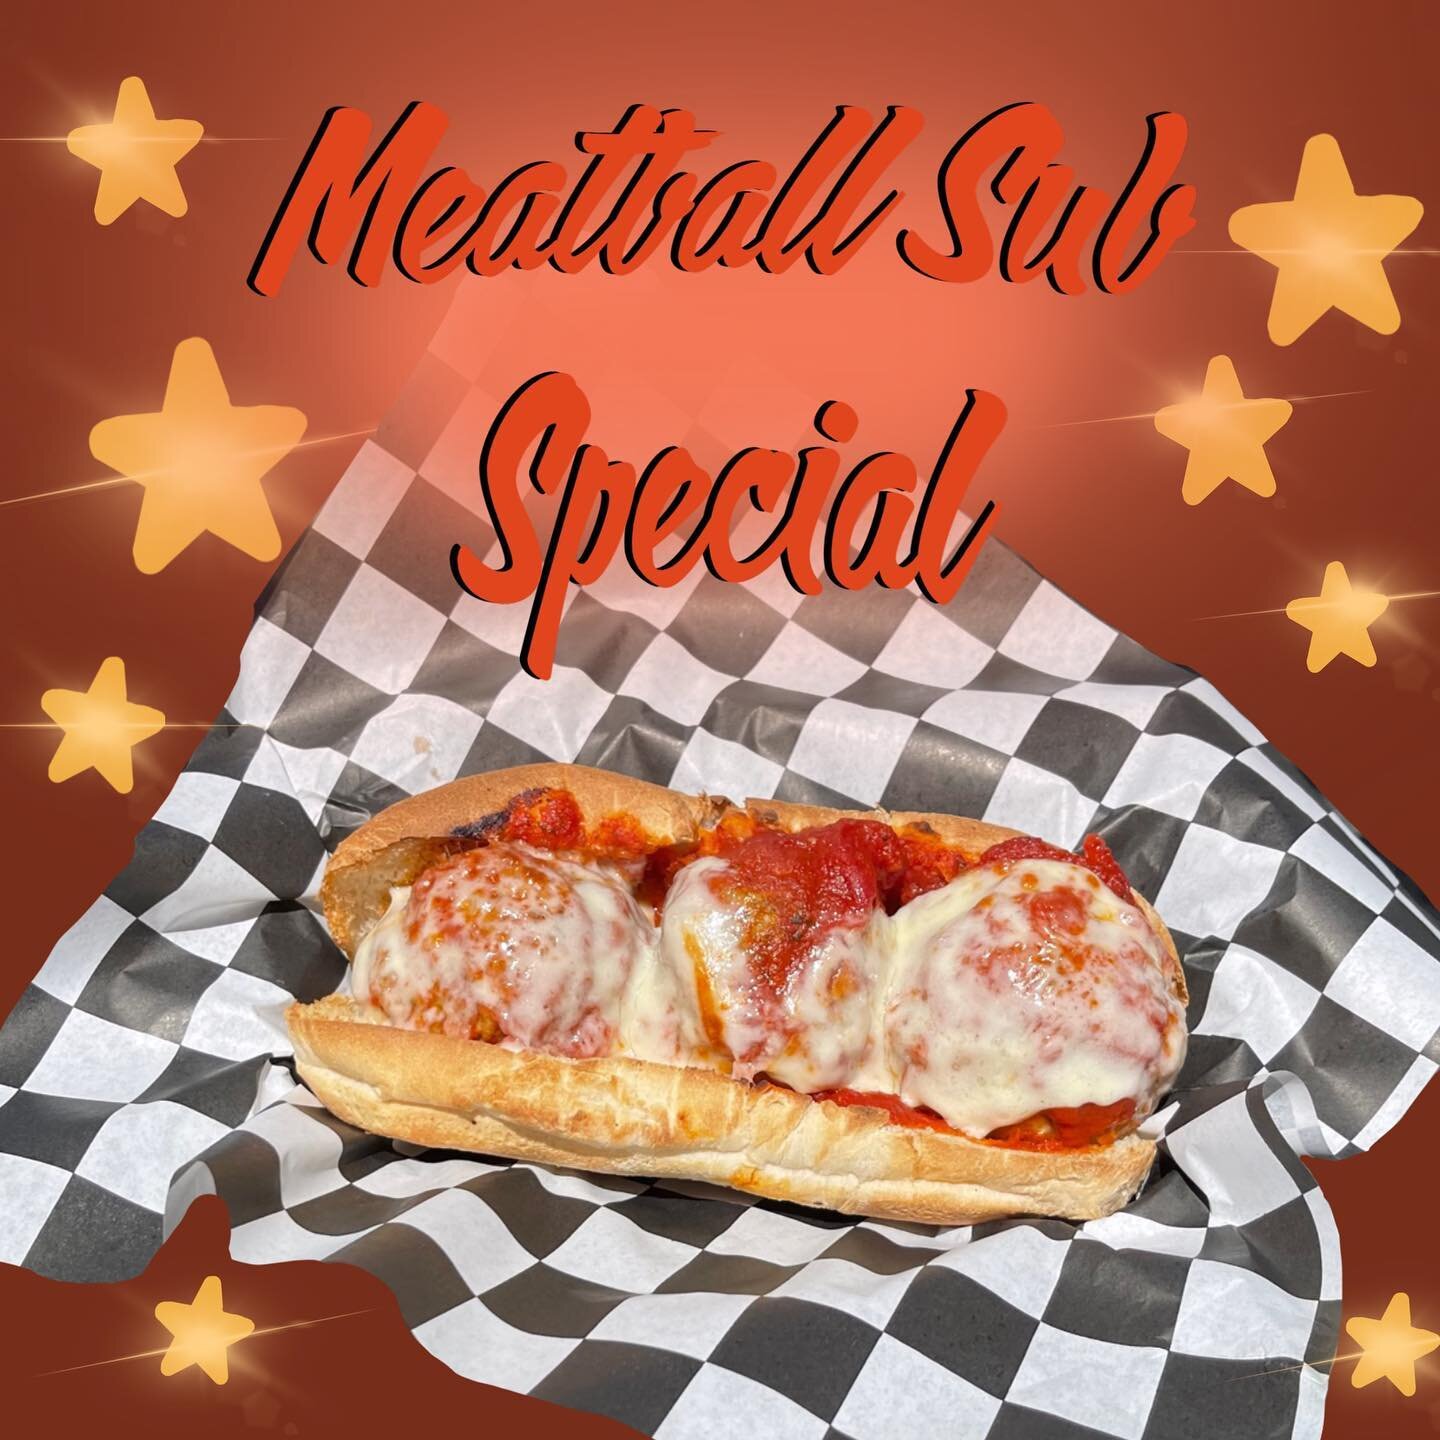 Our best special yet&hellip; Seriously so good. Toasted hoagie bun, giant juicy meatballs, marinara and melty provolone 🤤 come get one before we sell out, don&rsquo;t think this one will last long 😉